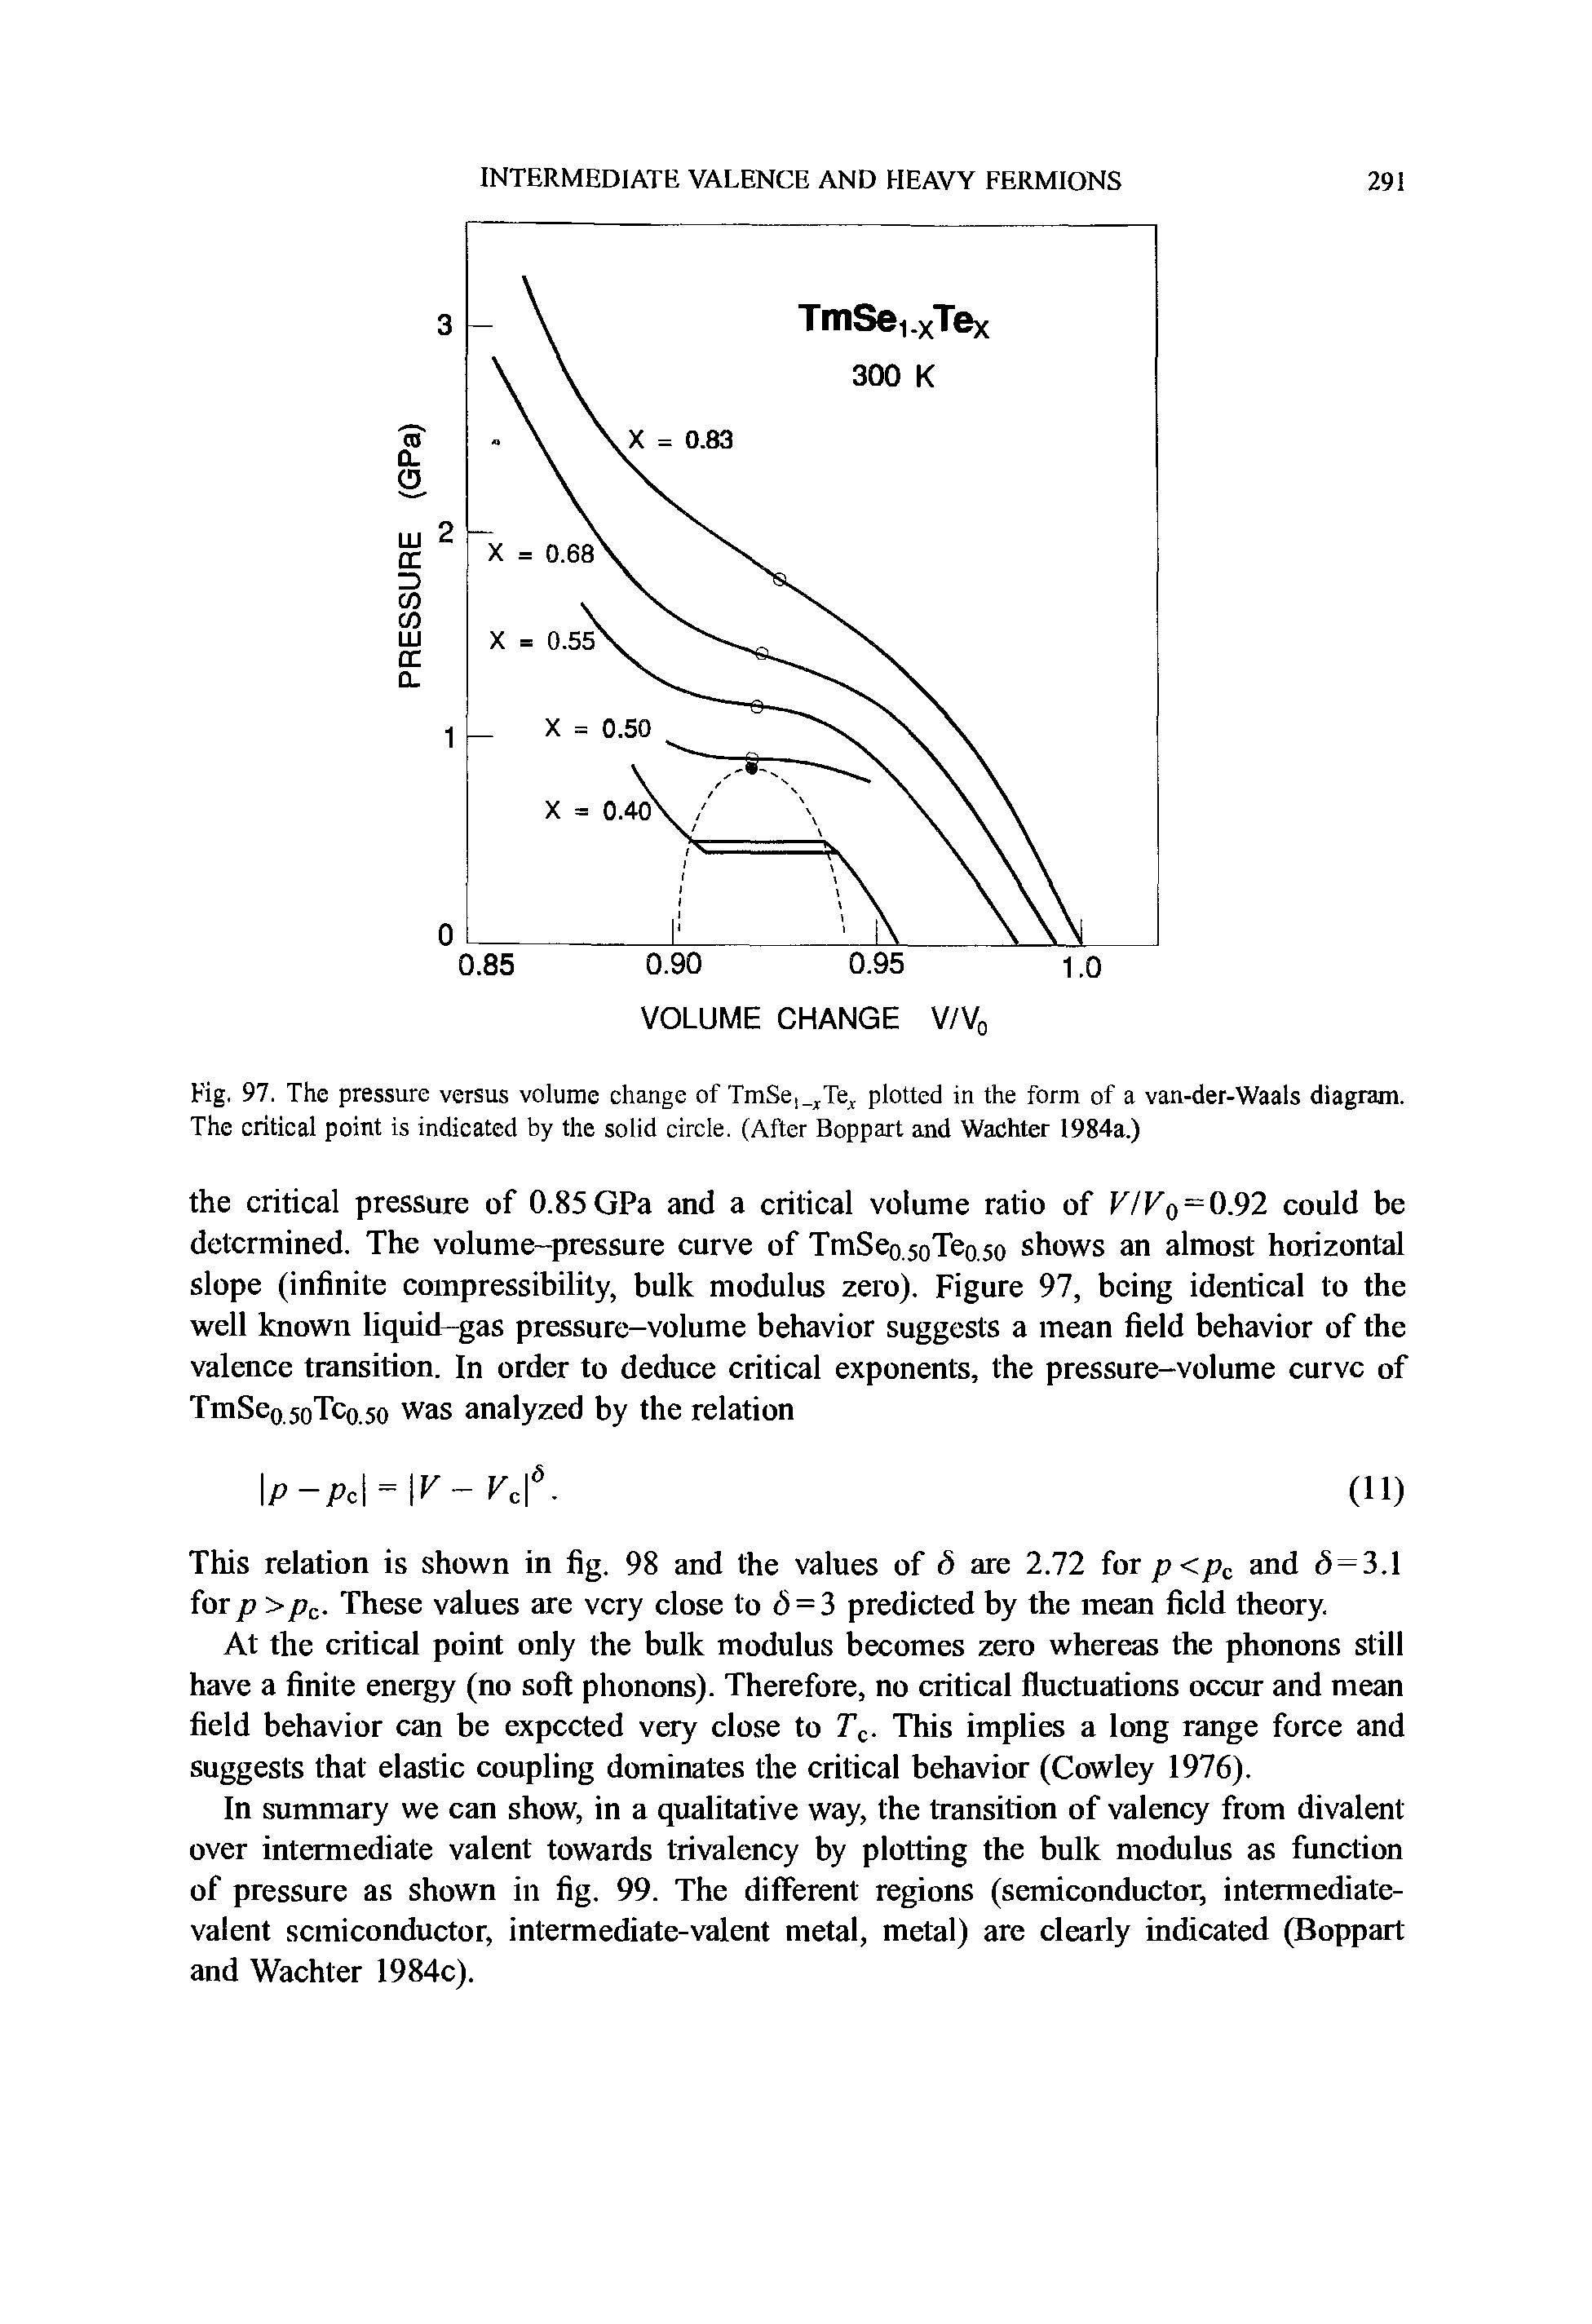 Fig. 97. The pressure versus volume change of TmSe, Te plotted in the form of a van-der-Waals diagram. The critical point is indicated by the solid circle. (After Boppart and Wachter 1984a.)...